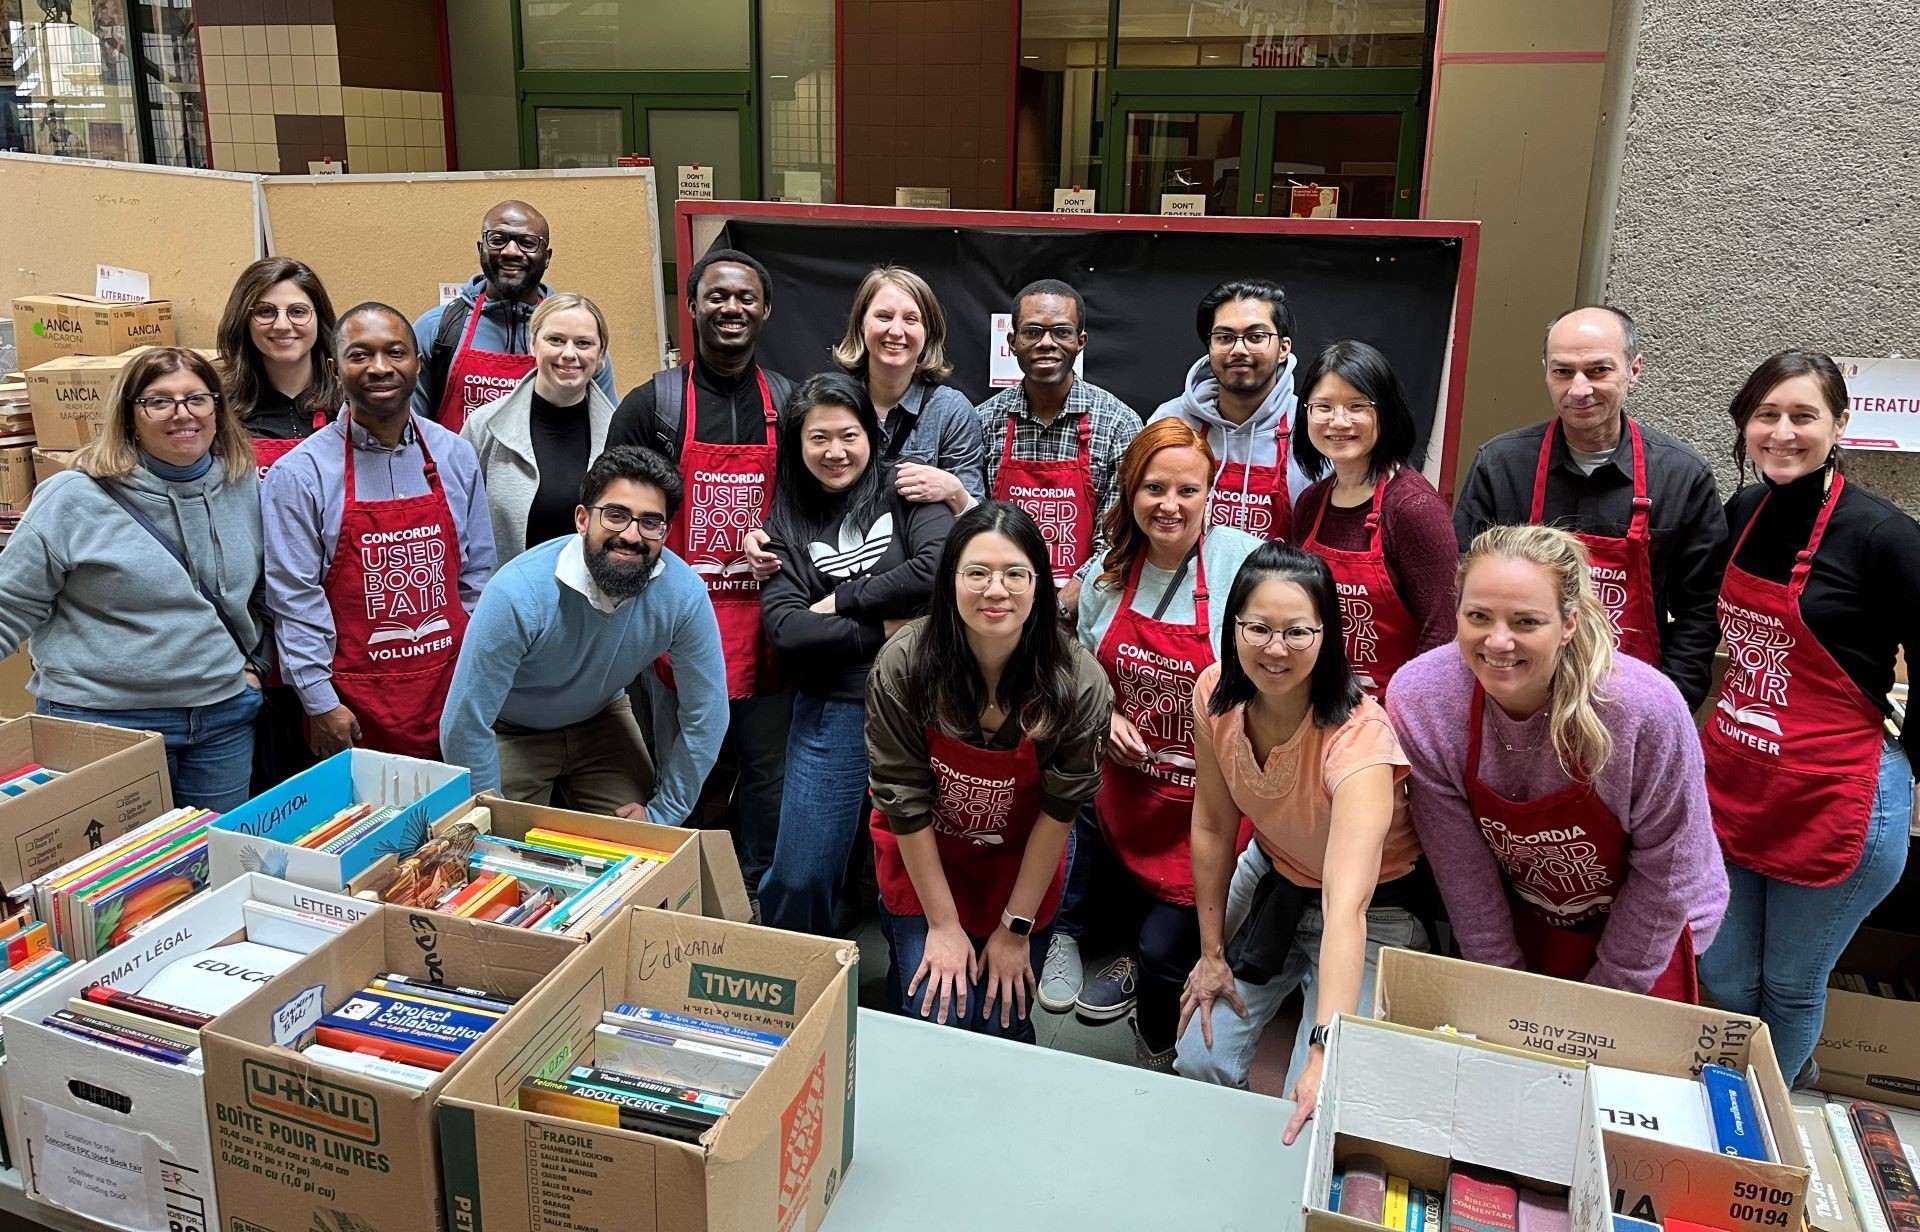 A group of cheerful volunteers wearing red aprons that read "Concordia Used Book Fair Volunteer" are standing behind boxes filled with books at an indoor event.